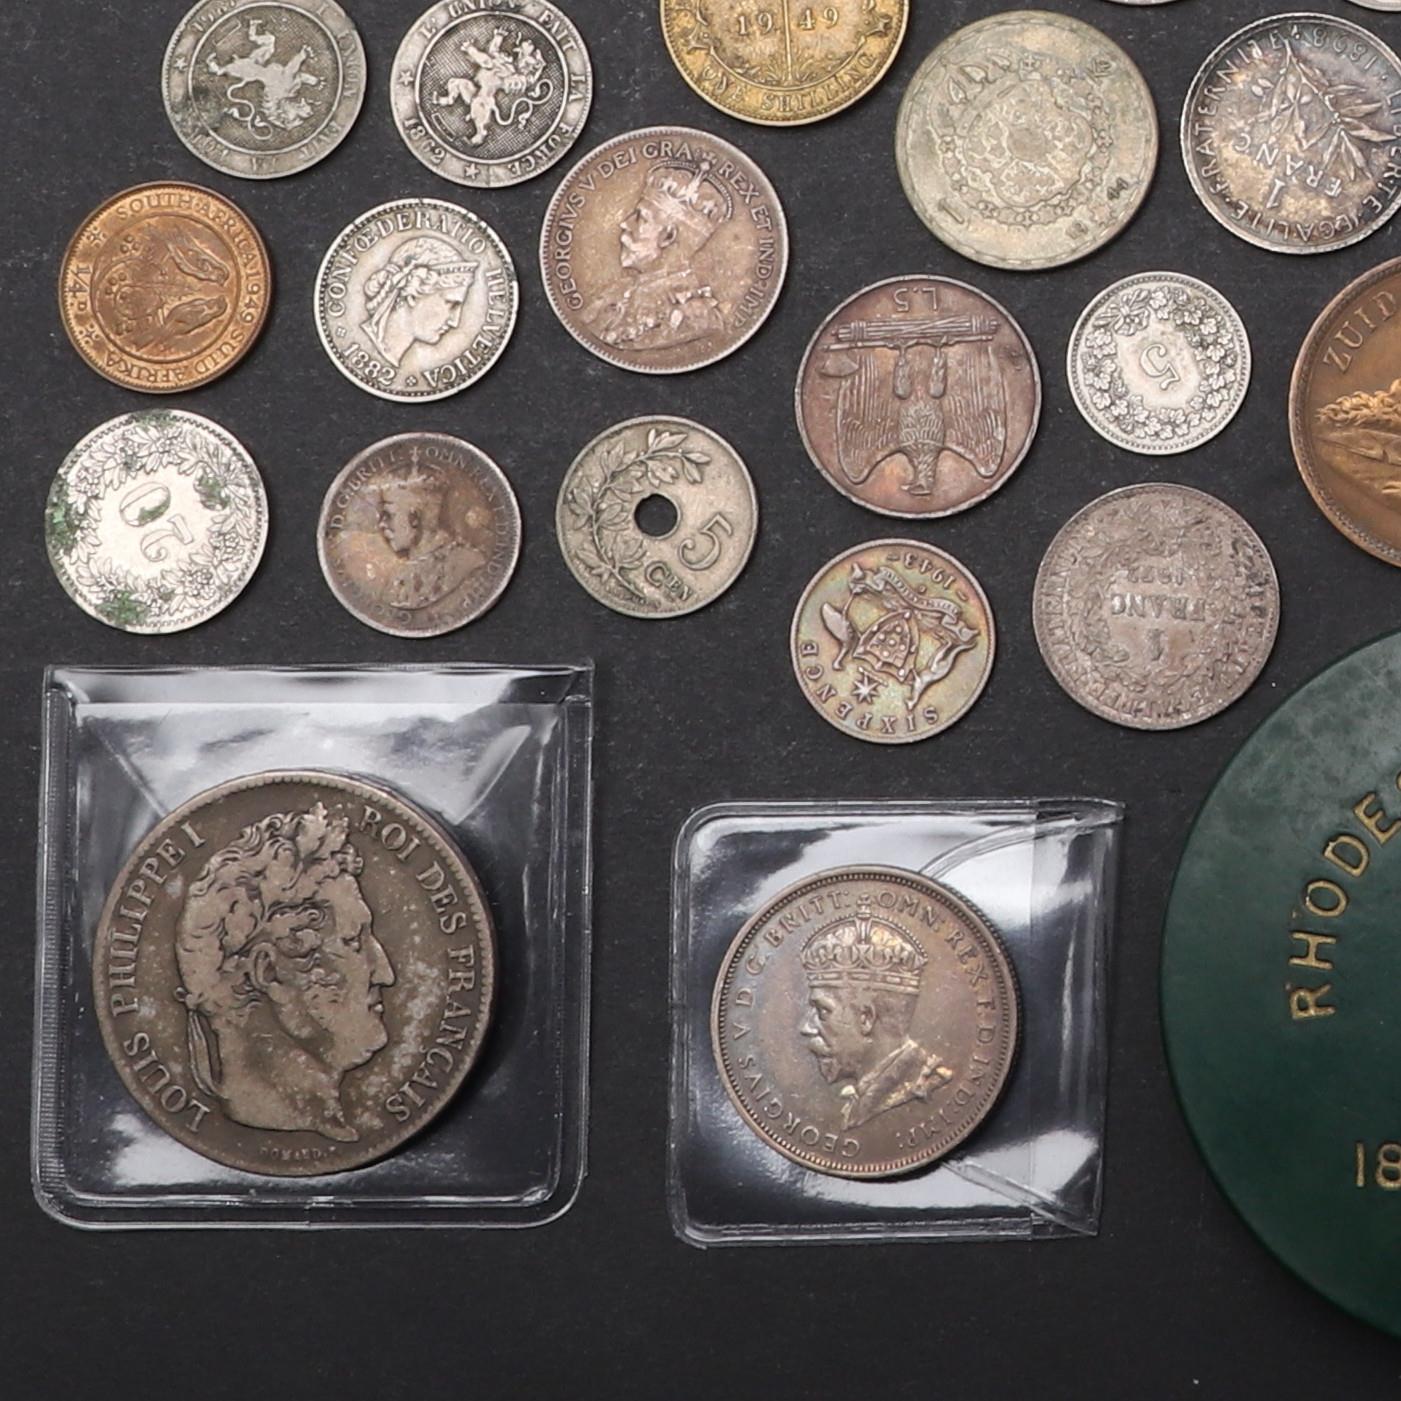 AN INTERESTING COLLECTION OF SOUTH AFRICAN AND OTHER WORLD COINS. - Image 3 of 7